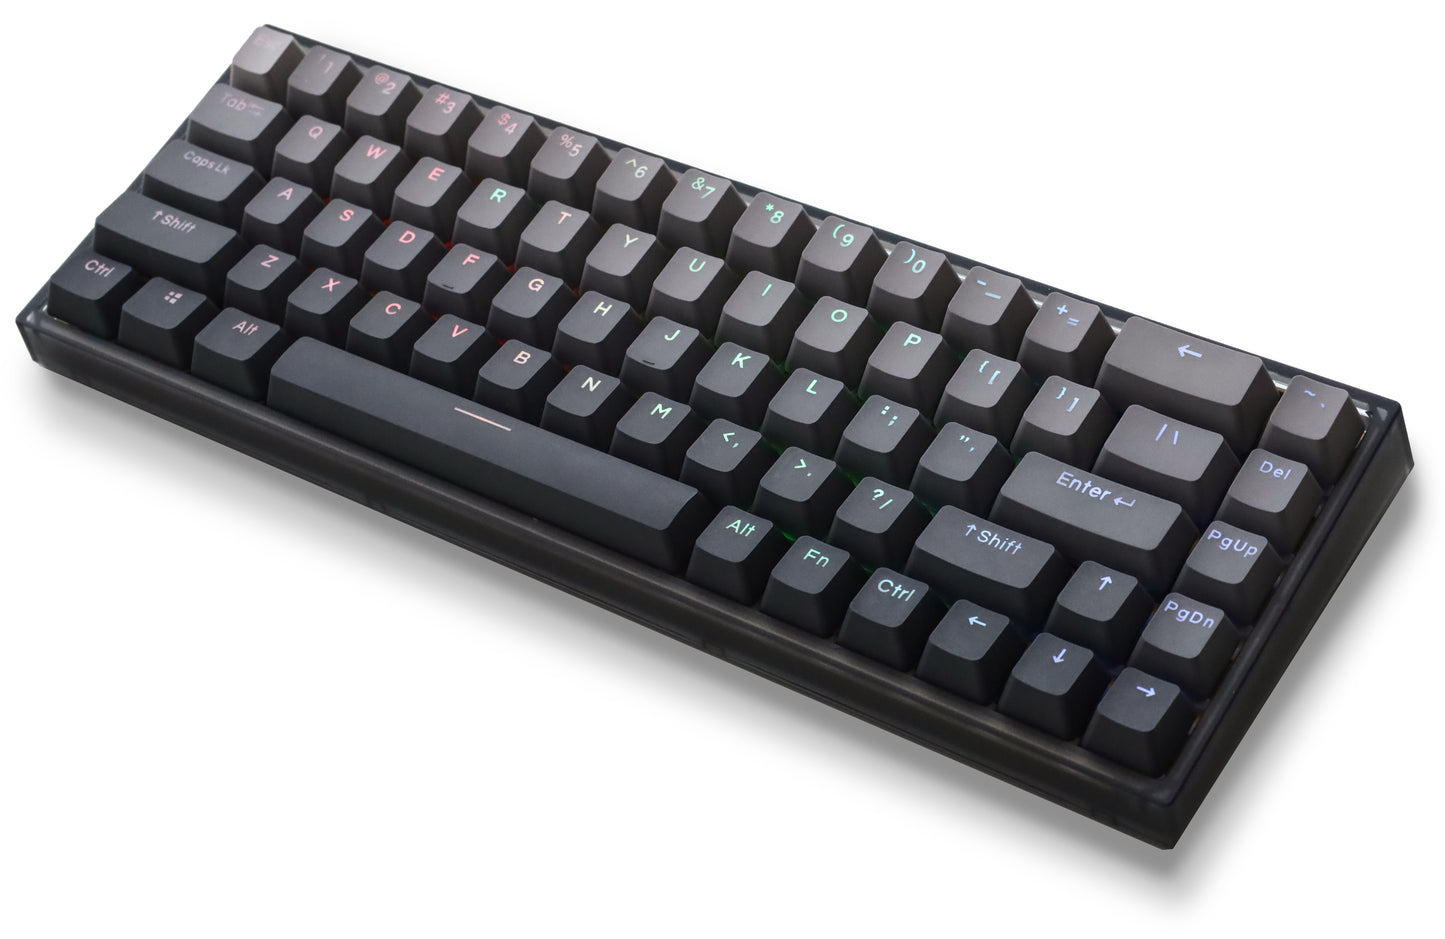 NJ68-CP Rapid Trigger Gaming Keyboard - HE Magnetic Switch